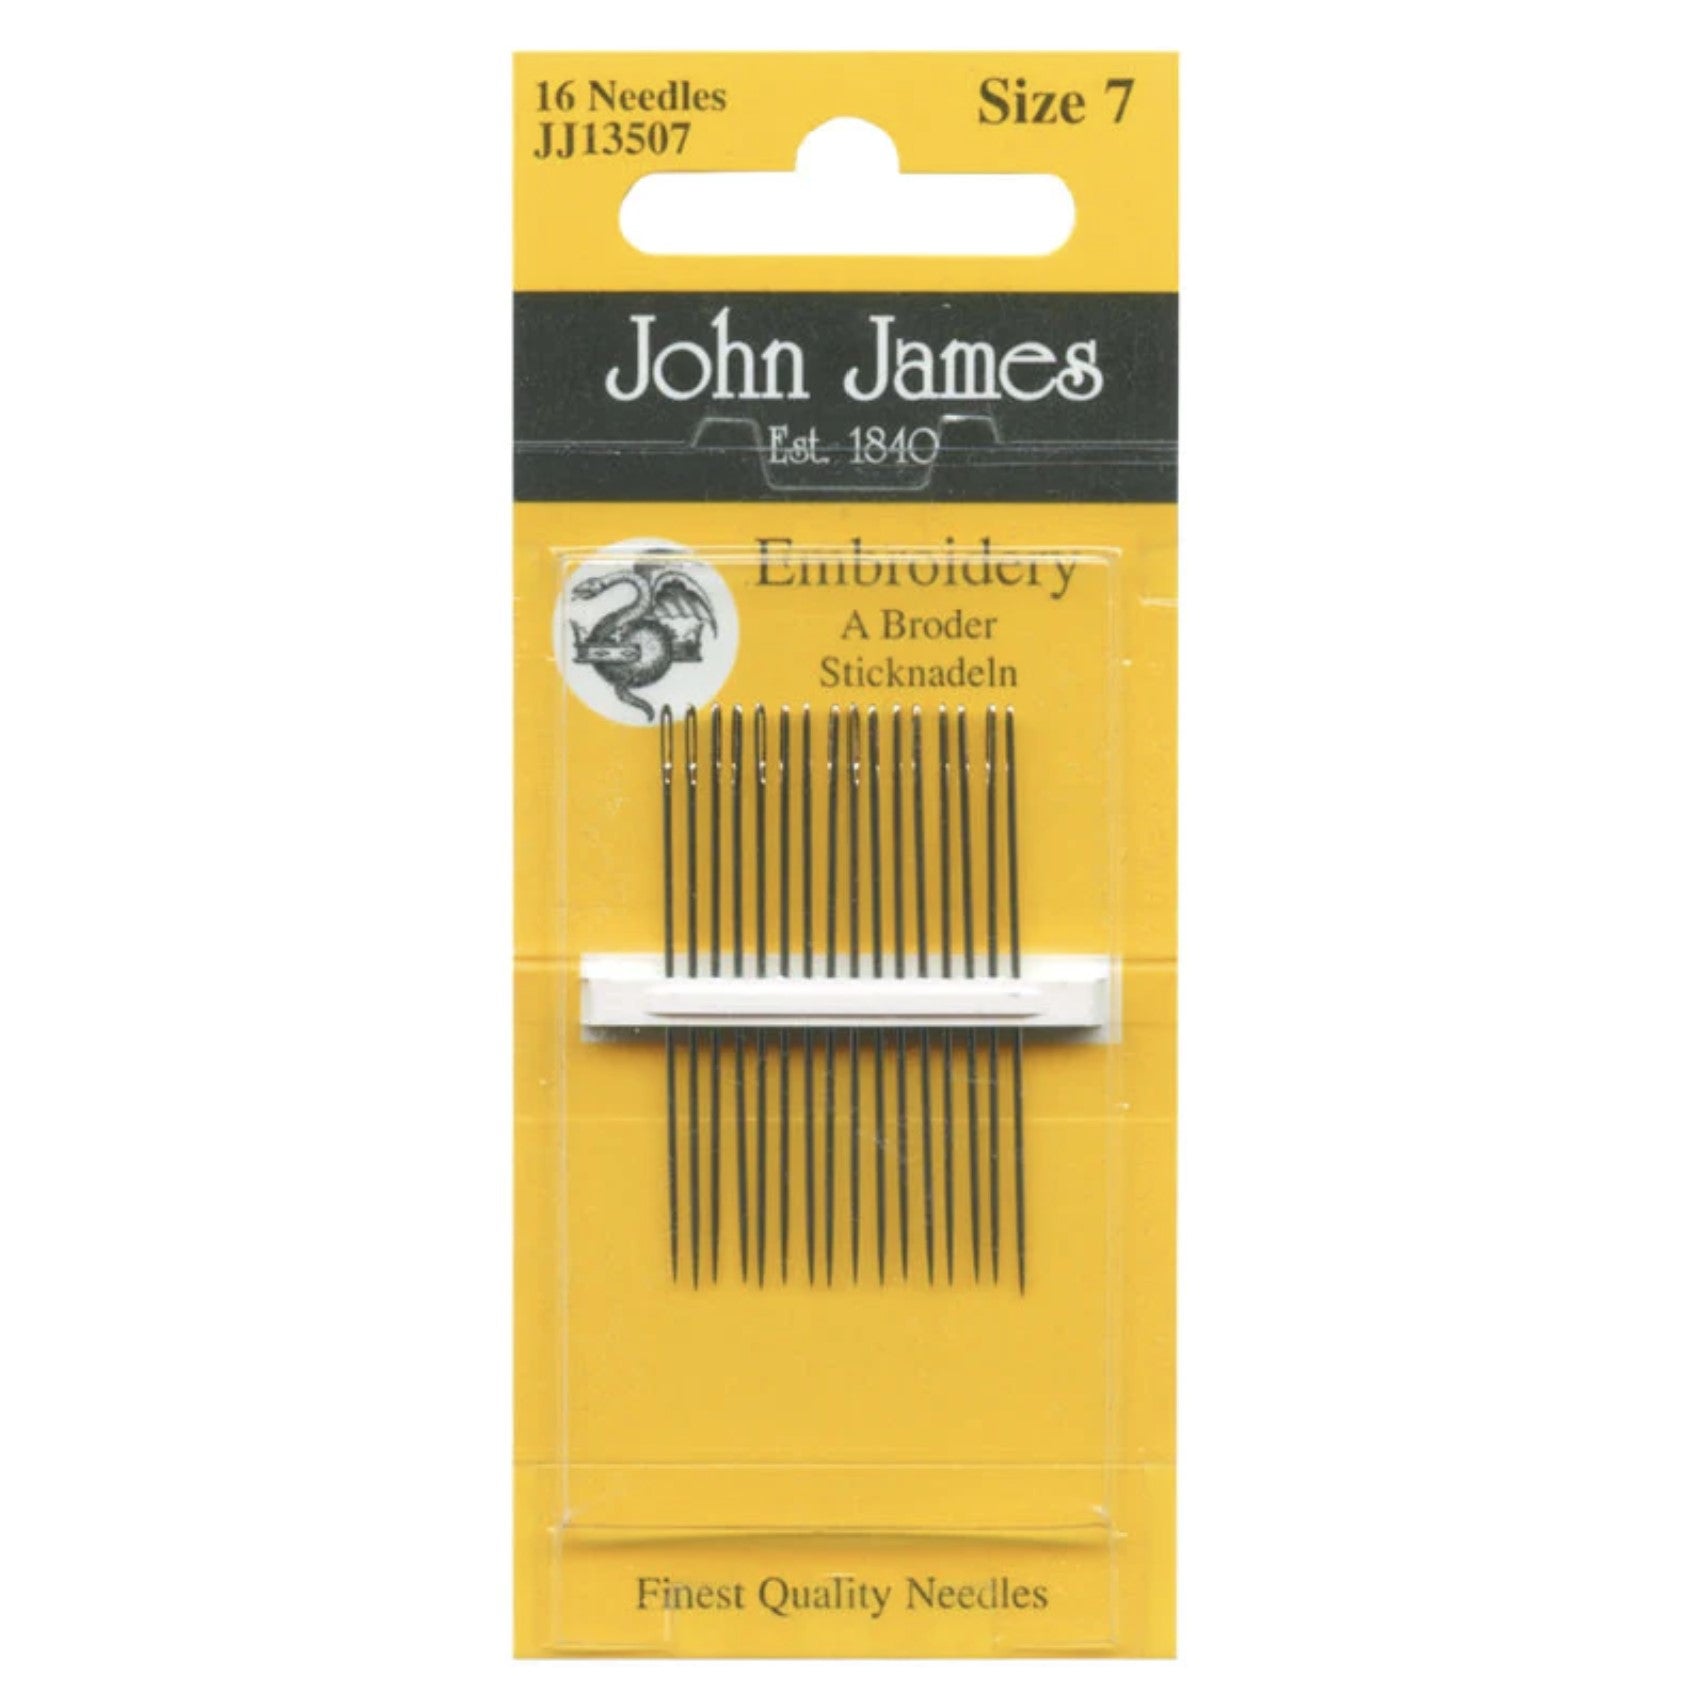 Embroidery Needles, Size 7, Ref. JJ13507 by John James®